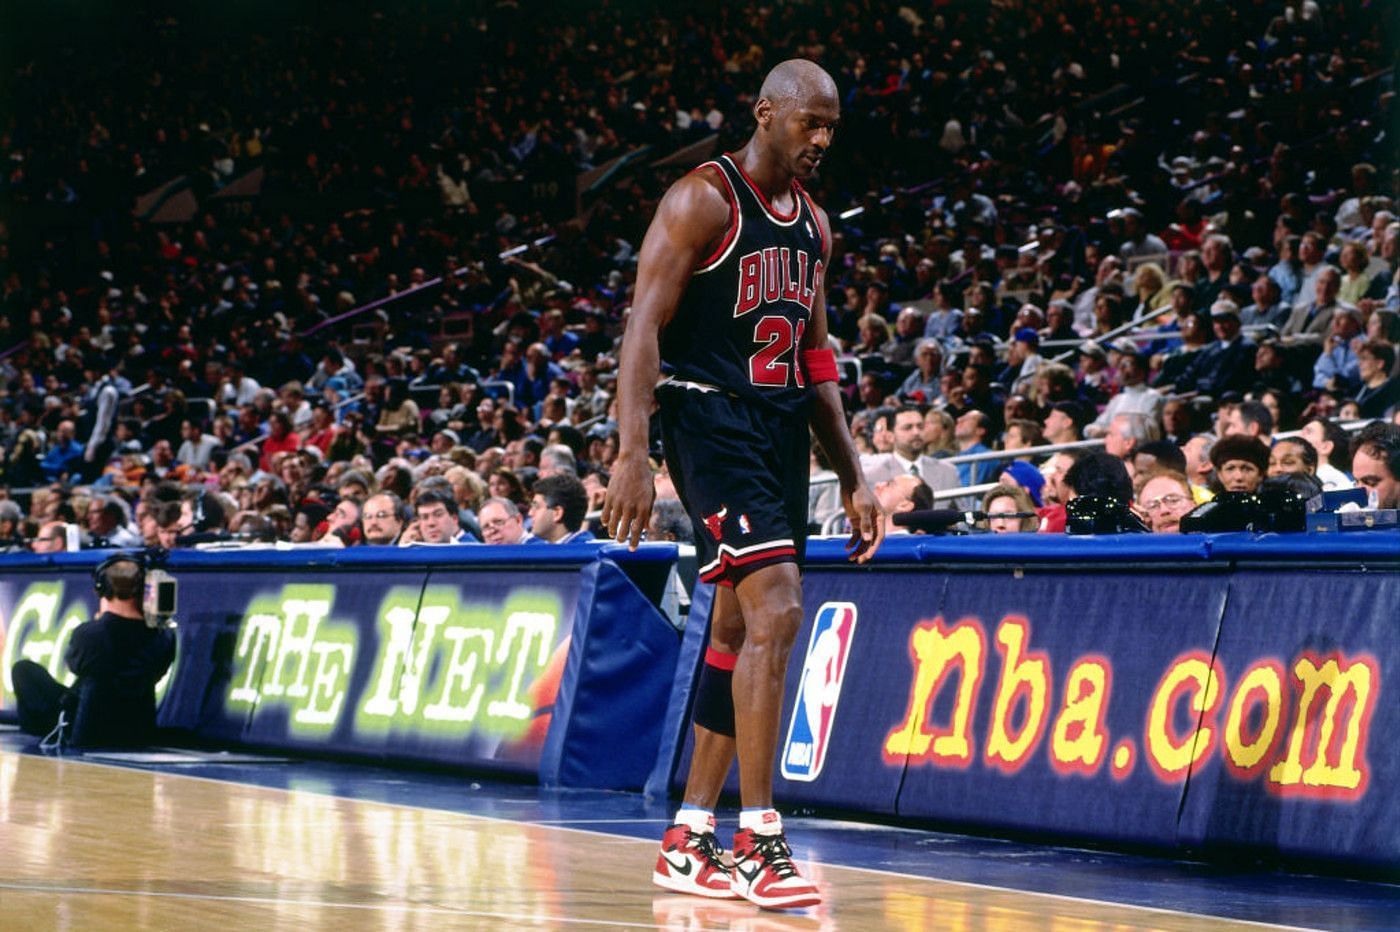 Michael Jordan during a game against the New York Knicks